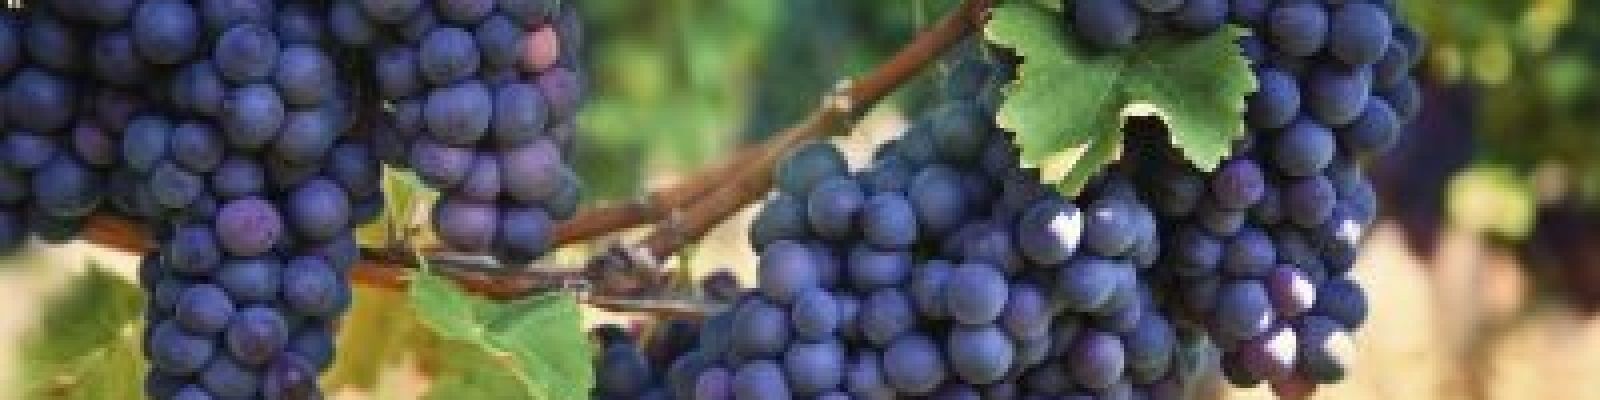 napa valley wine tours tasting fees included